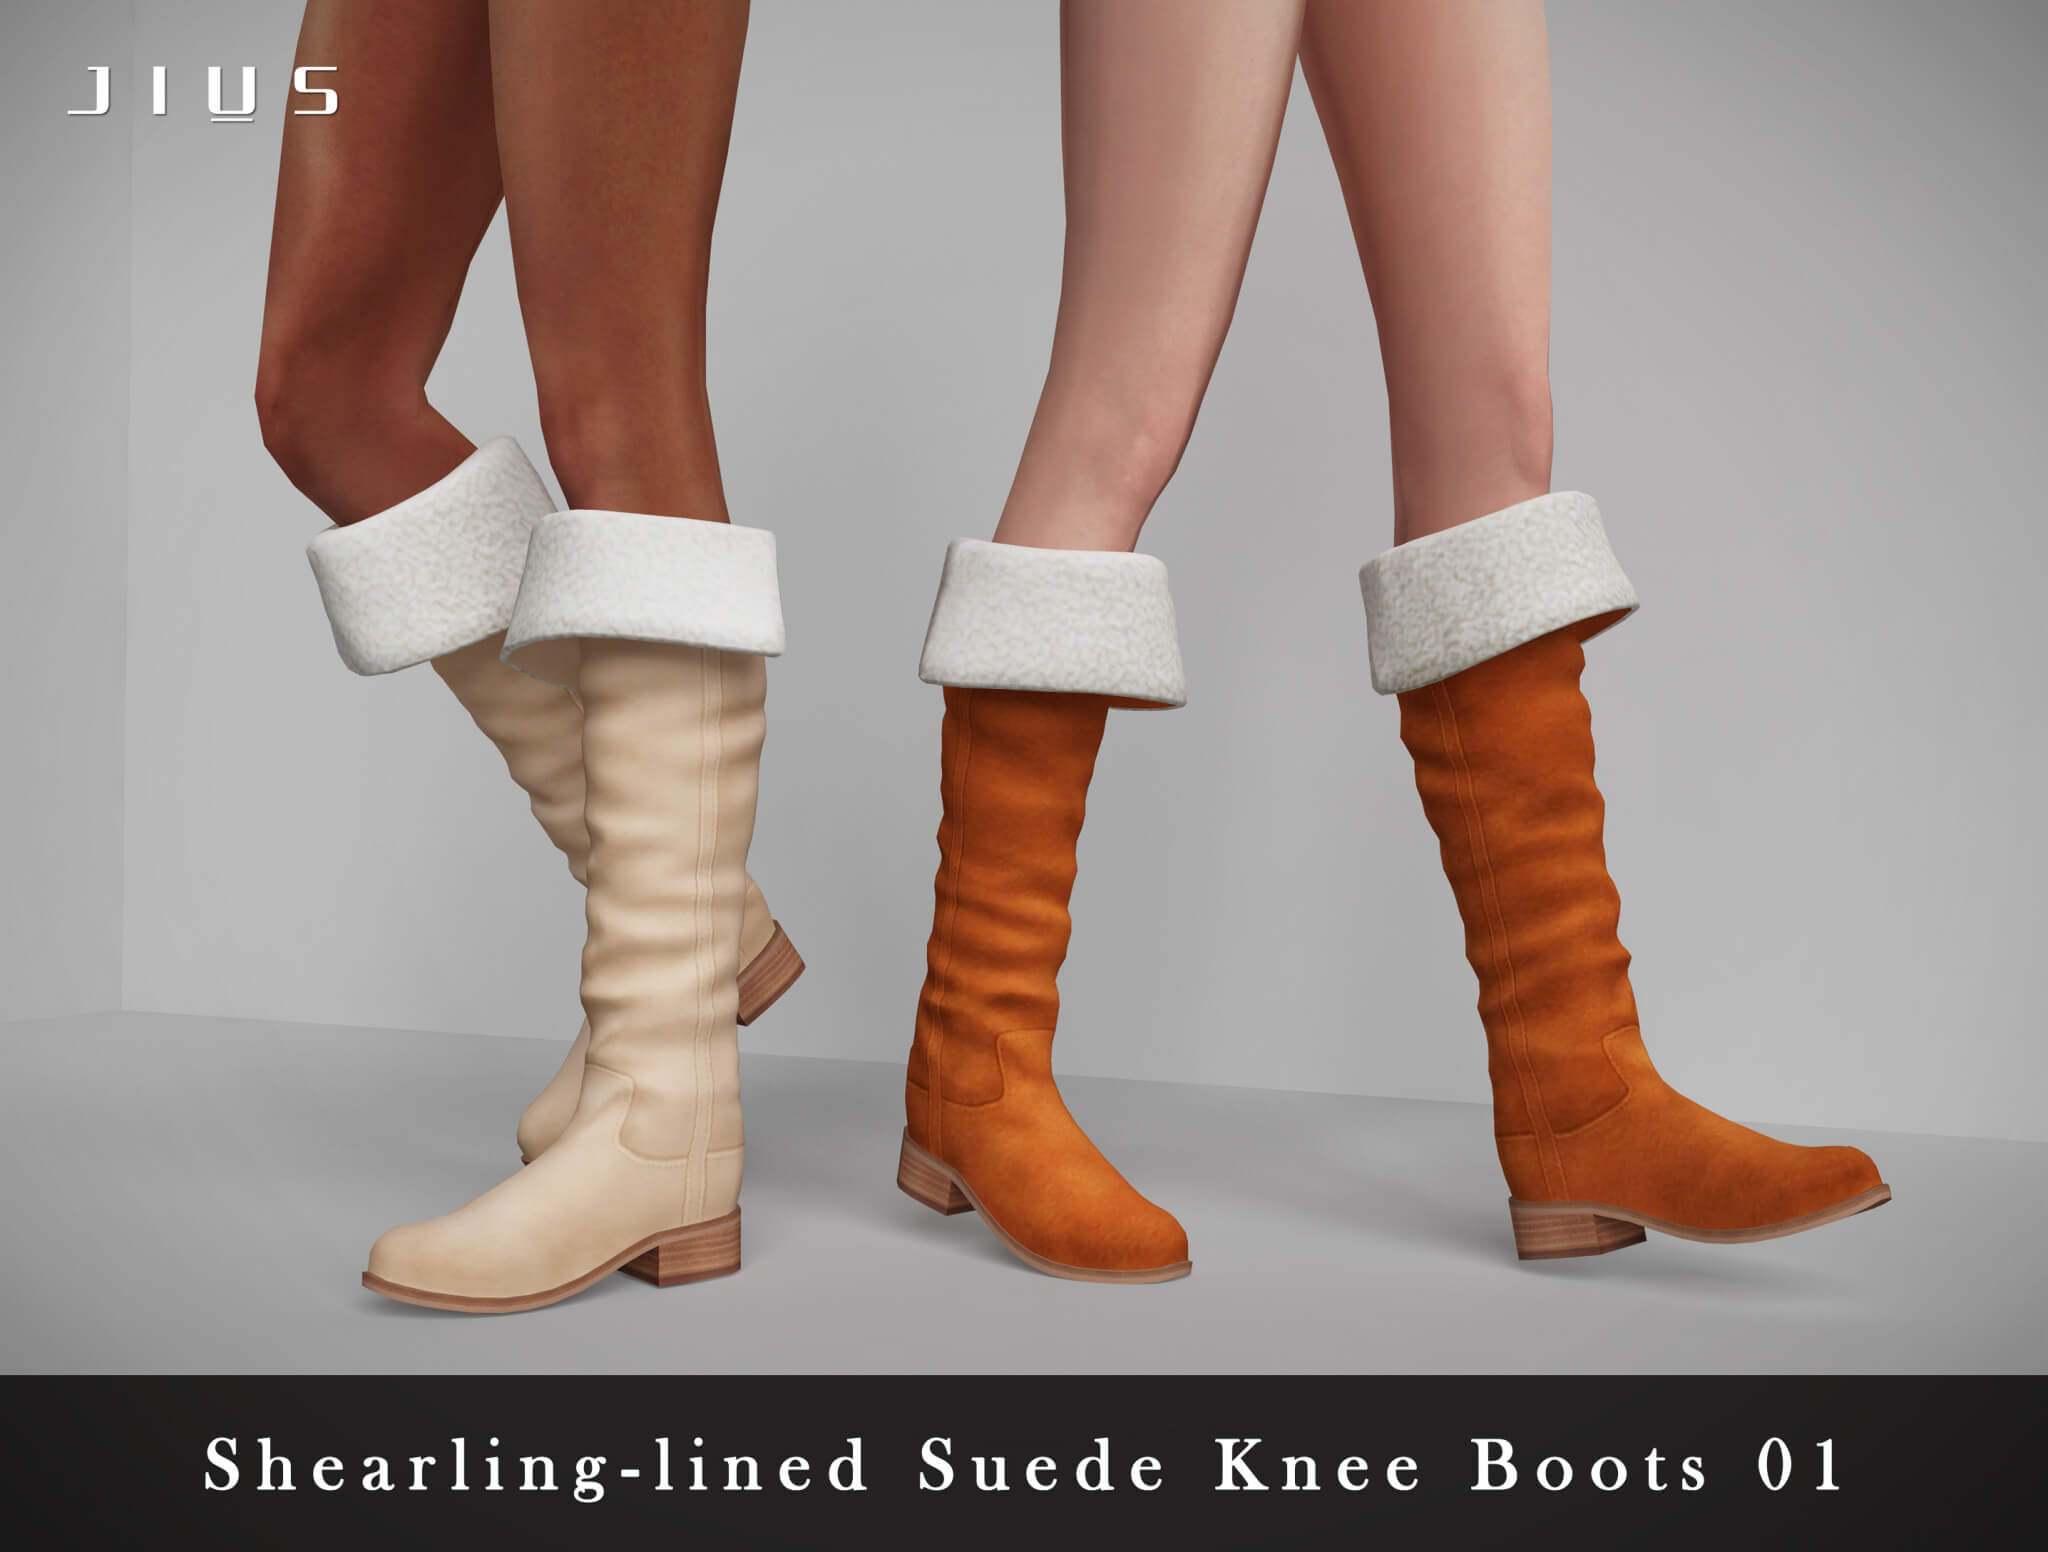 Sims 4 Shearling-lined Suede Knee Boots 01 | The Sims Book